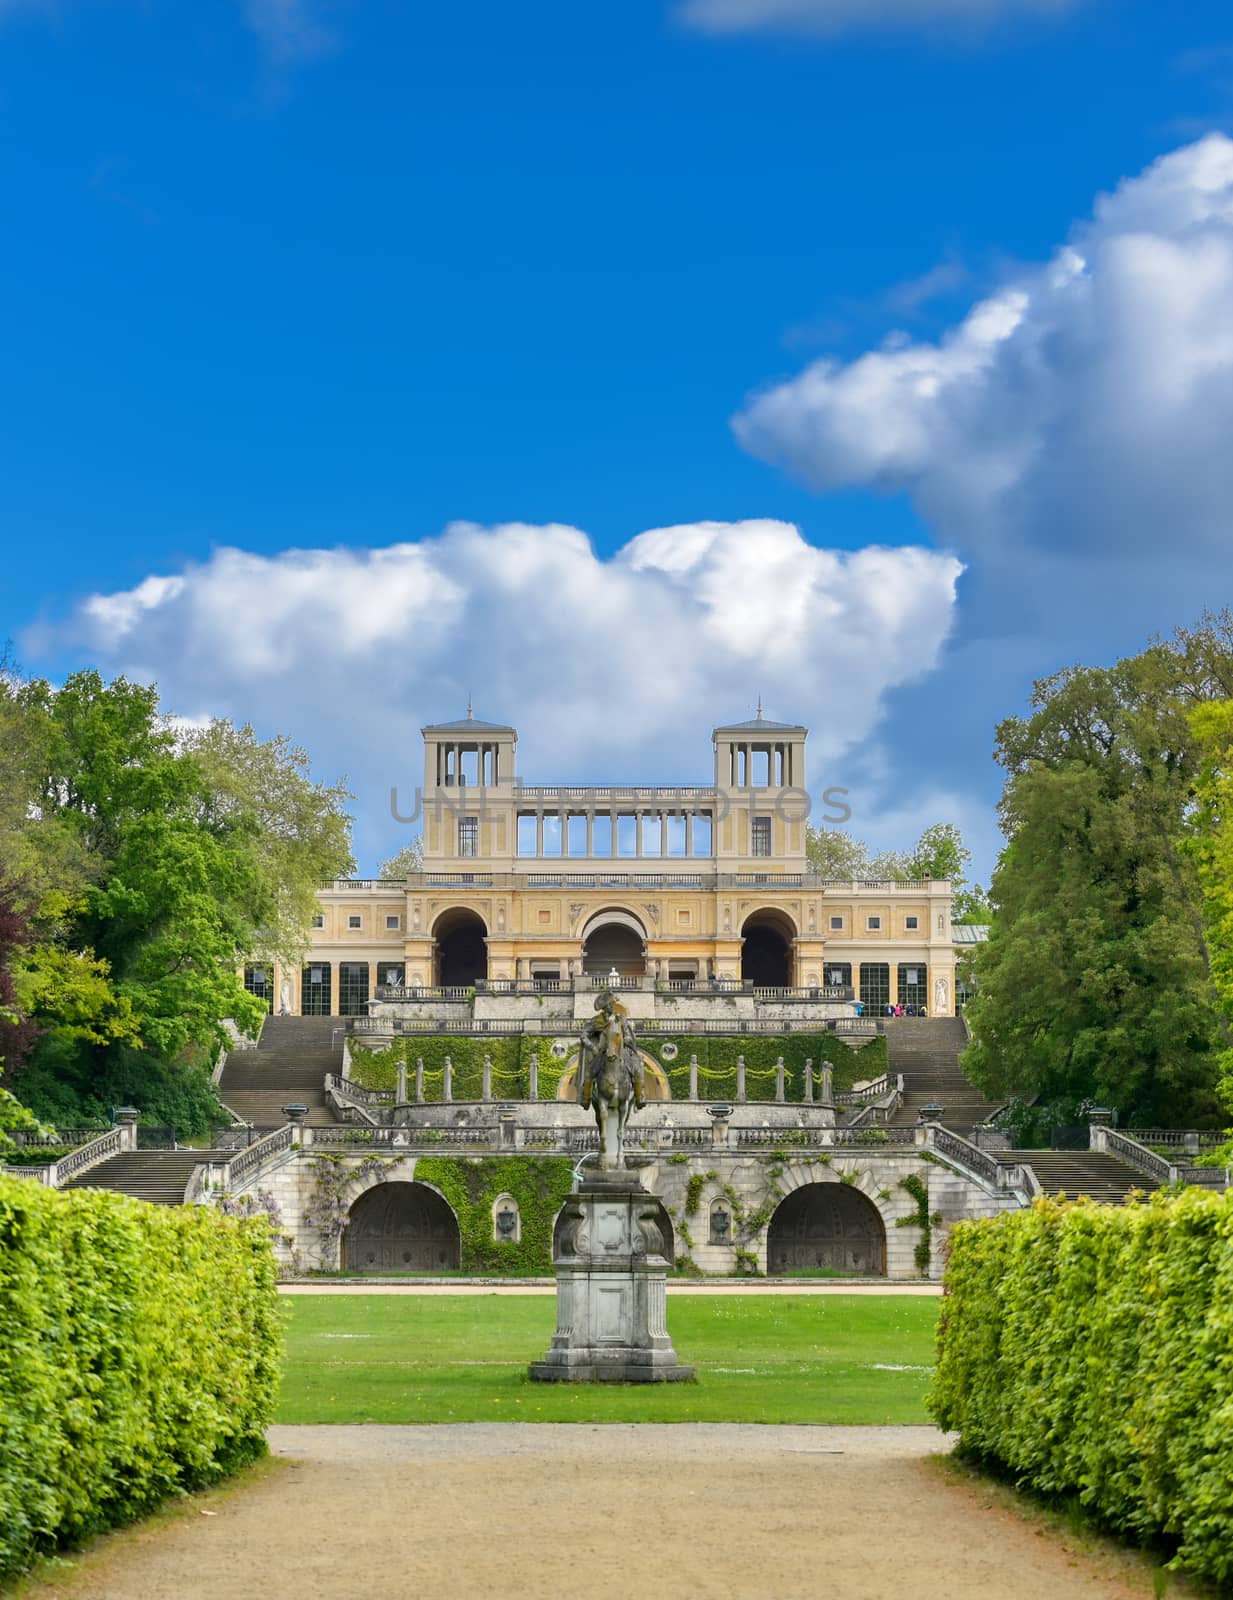 The Orangery Palace in Sanssouci Park located in Potsdam, Germany.